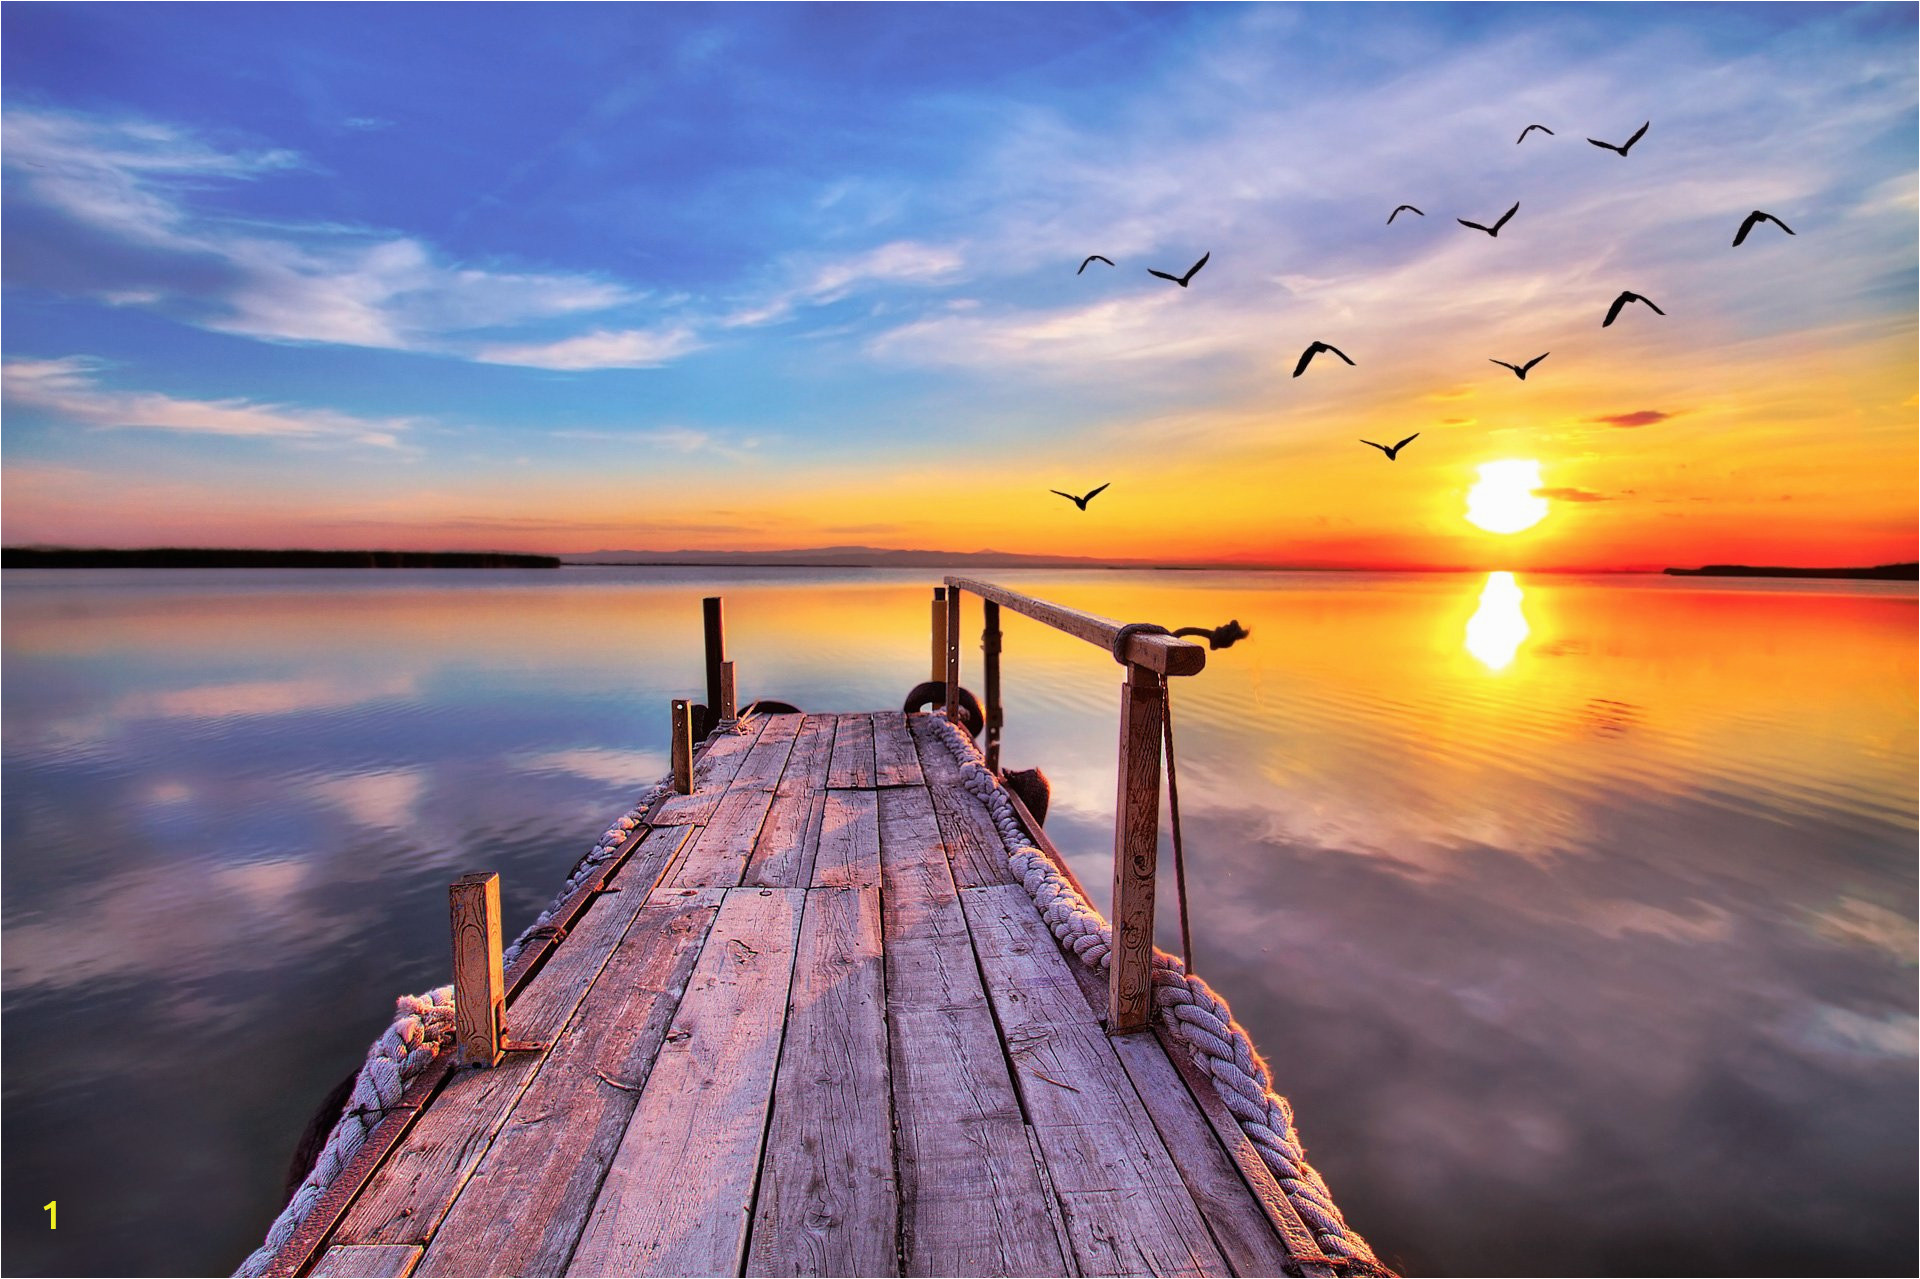 Early American Wall Murals Early Bird Dock Fly by Sunrise Sunset